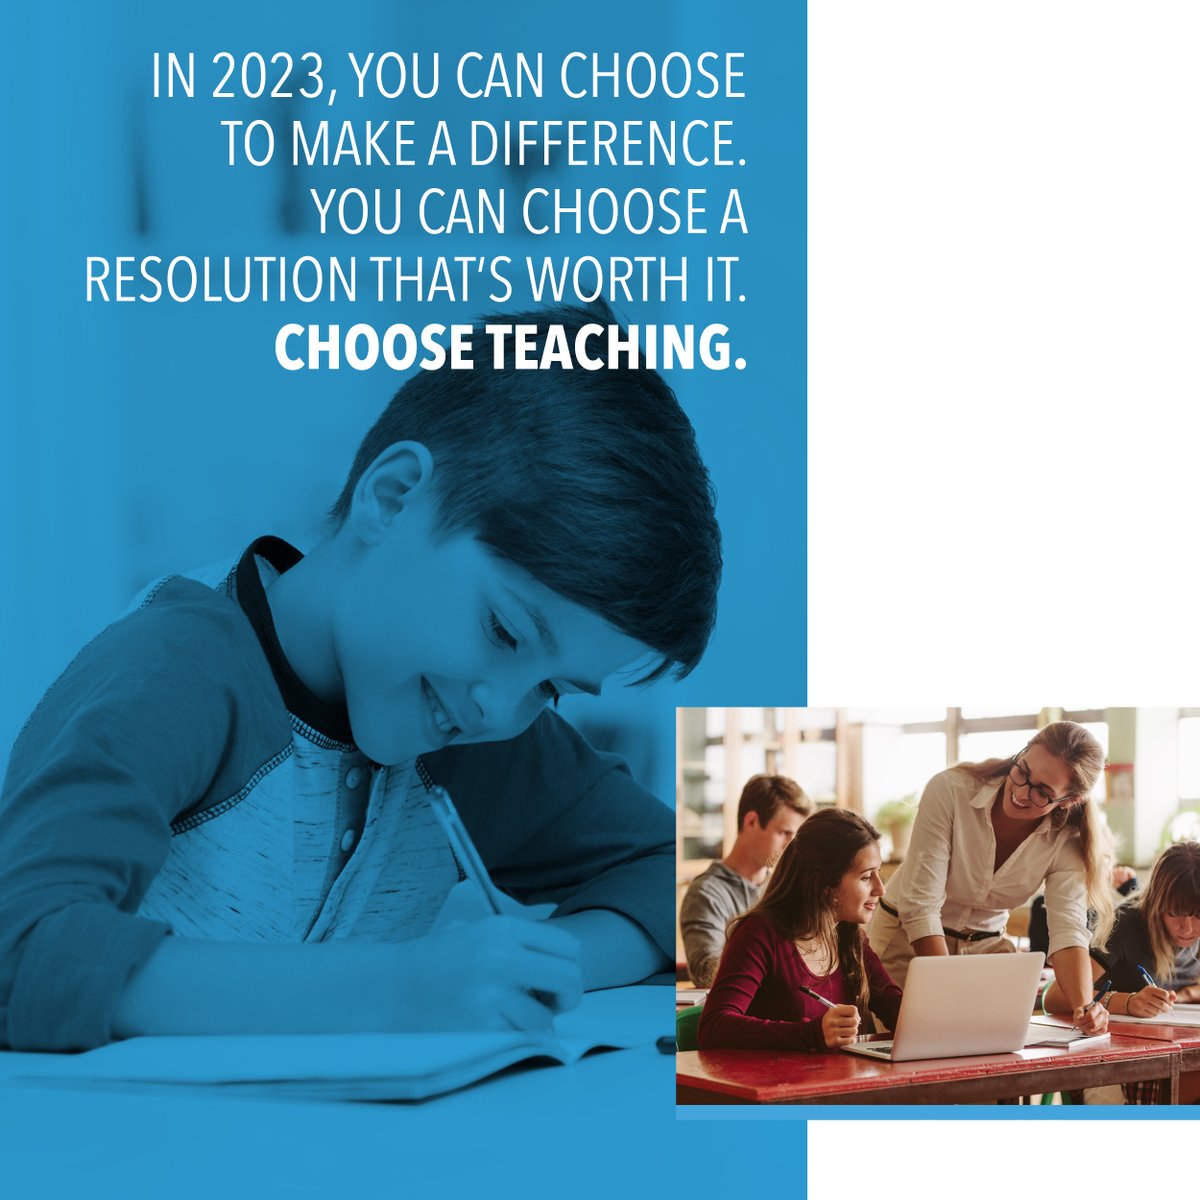 Kick off the New Year with a new CAREER. There is no better time to make your New Year’s resolution count. Choose teaching today. 📚 Learn more here: bit.ly/3VEEz7y
.
#TeachersofTomorrow #ChooseWorkThatsWorthIt #ChooseTeaching